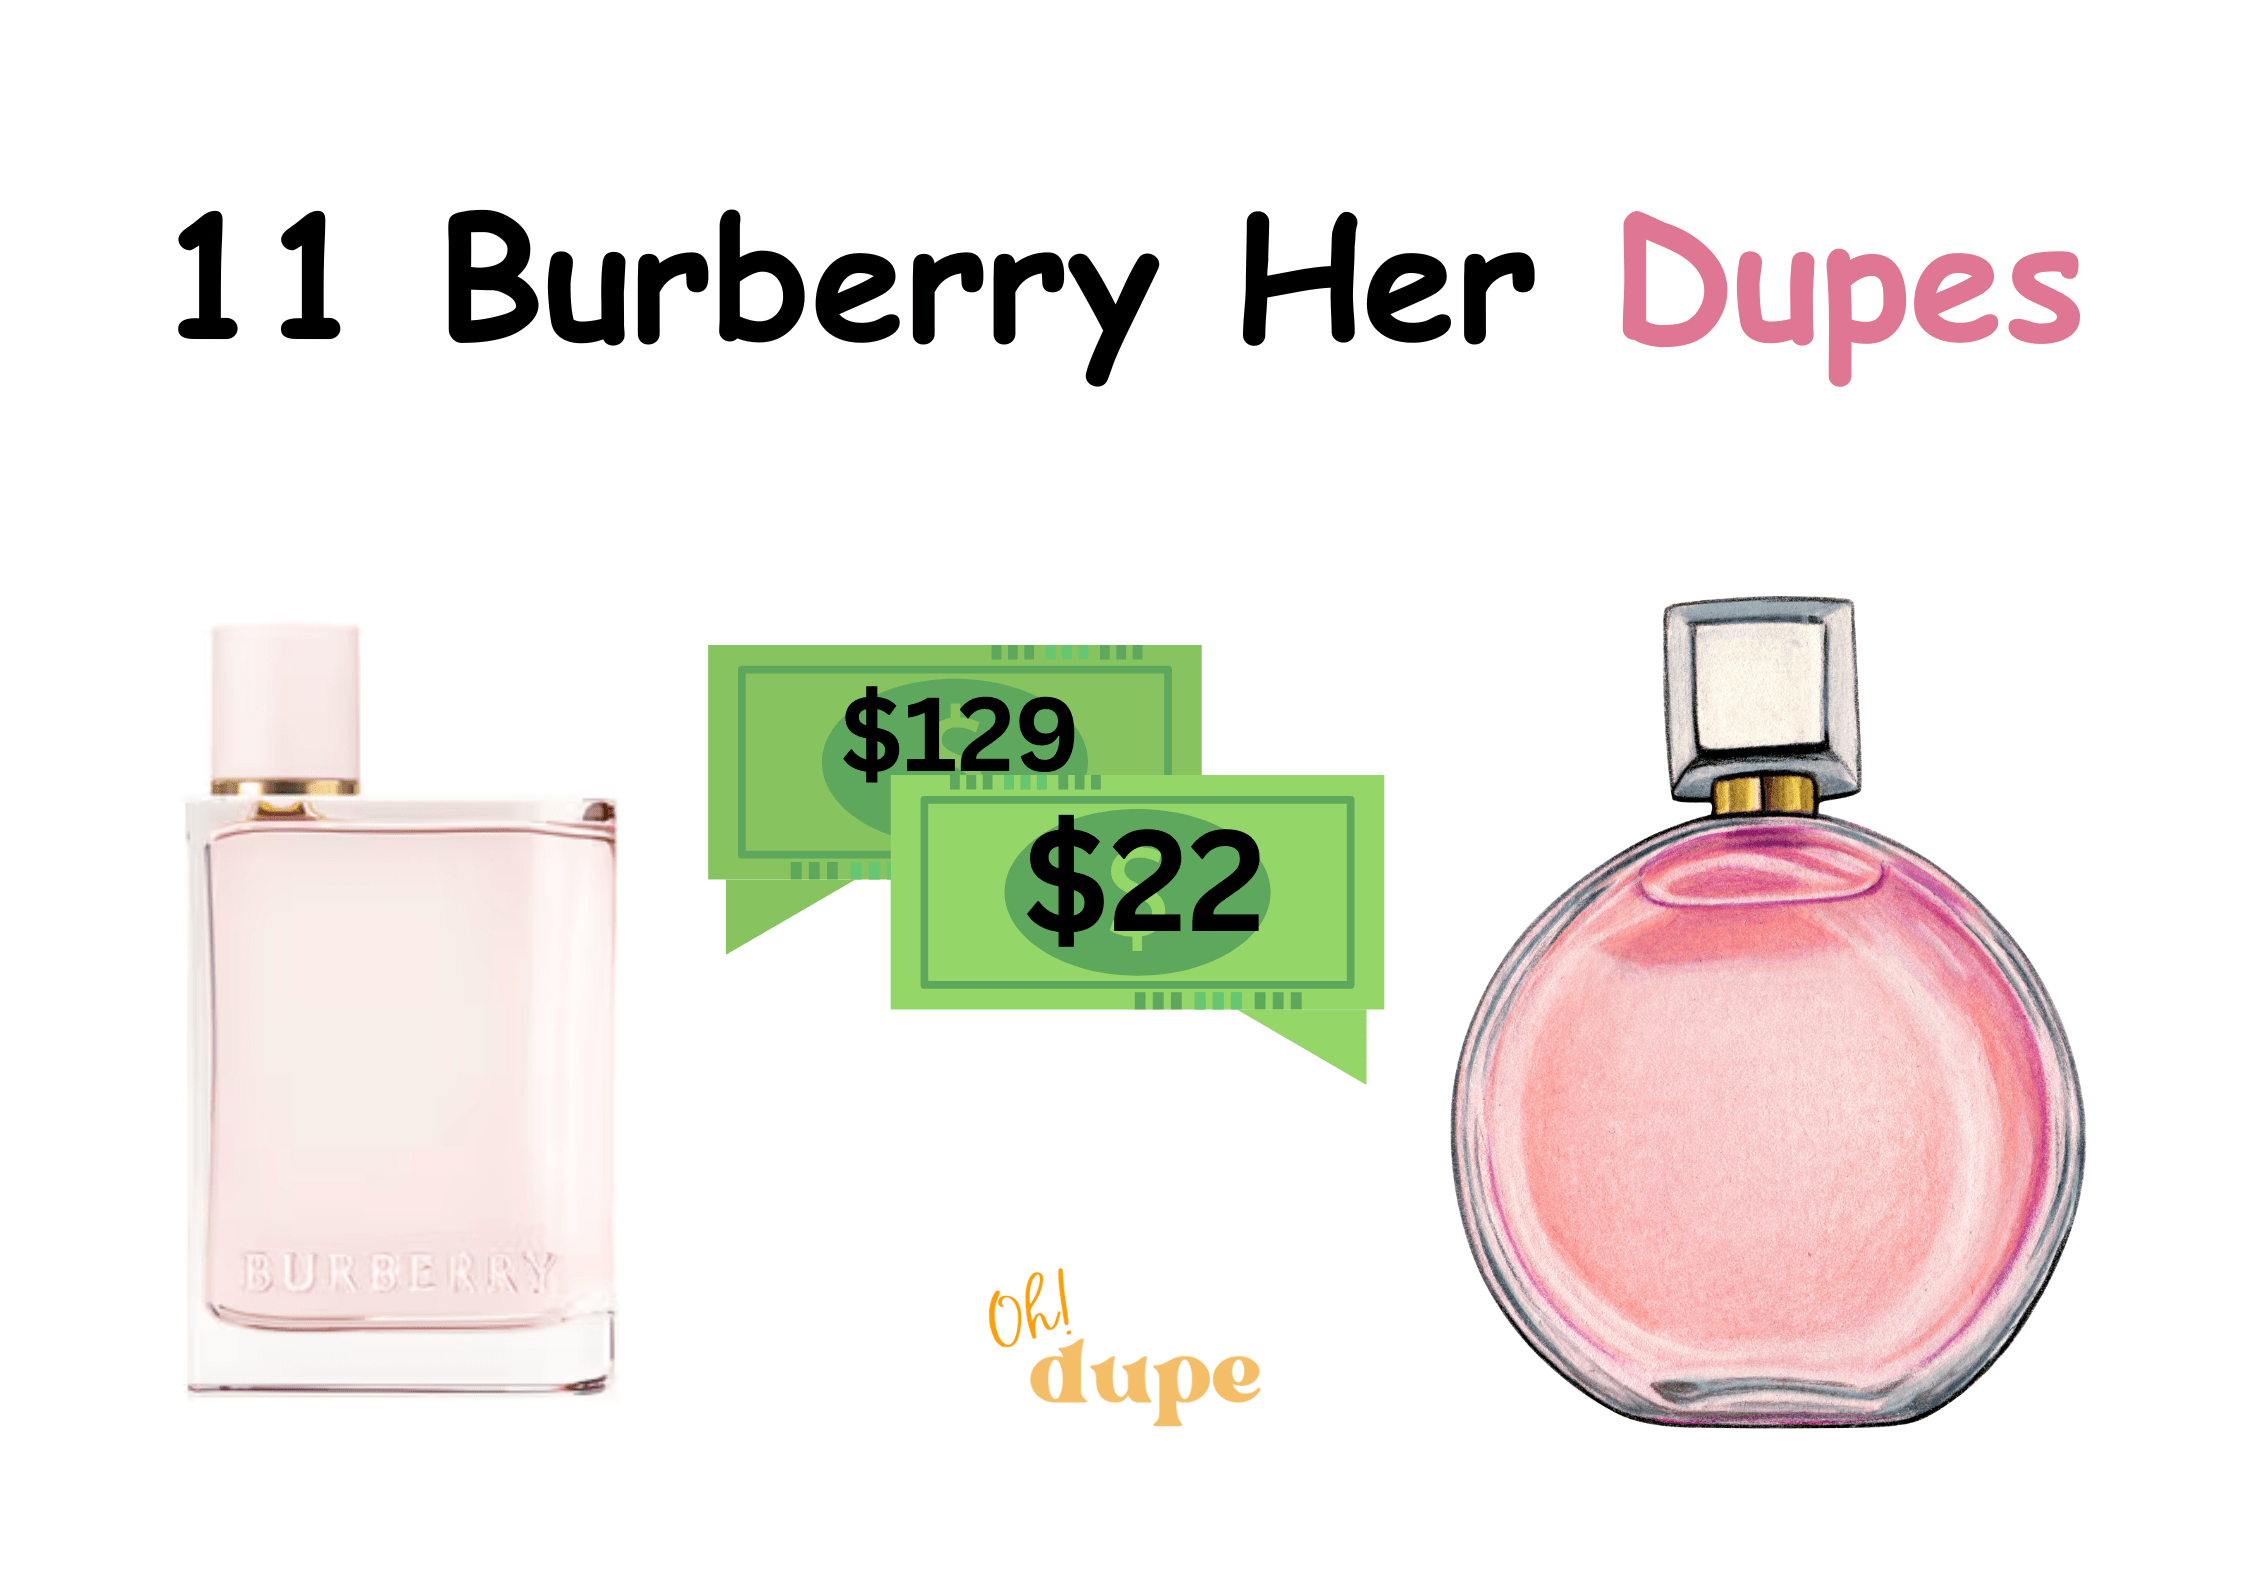 Burberry Her Dupe